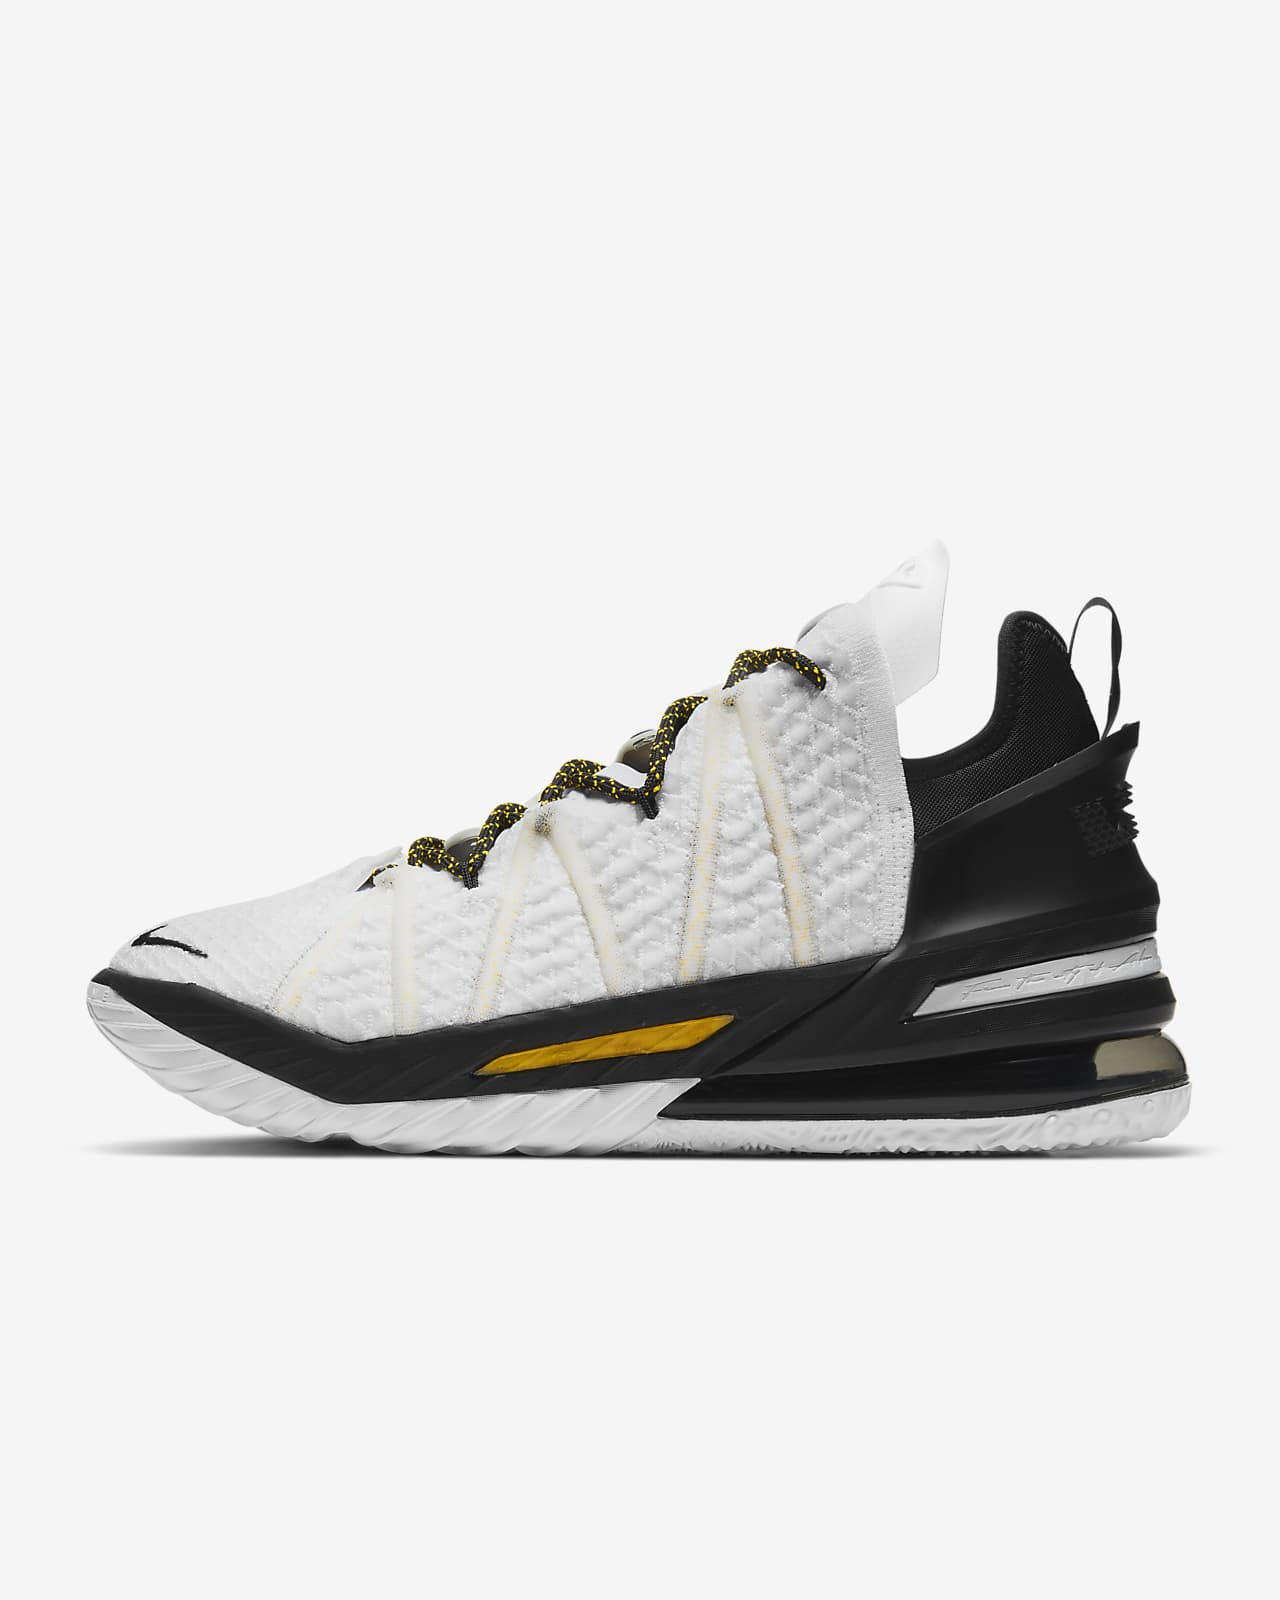 lebron james shoes gold and black